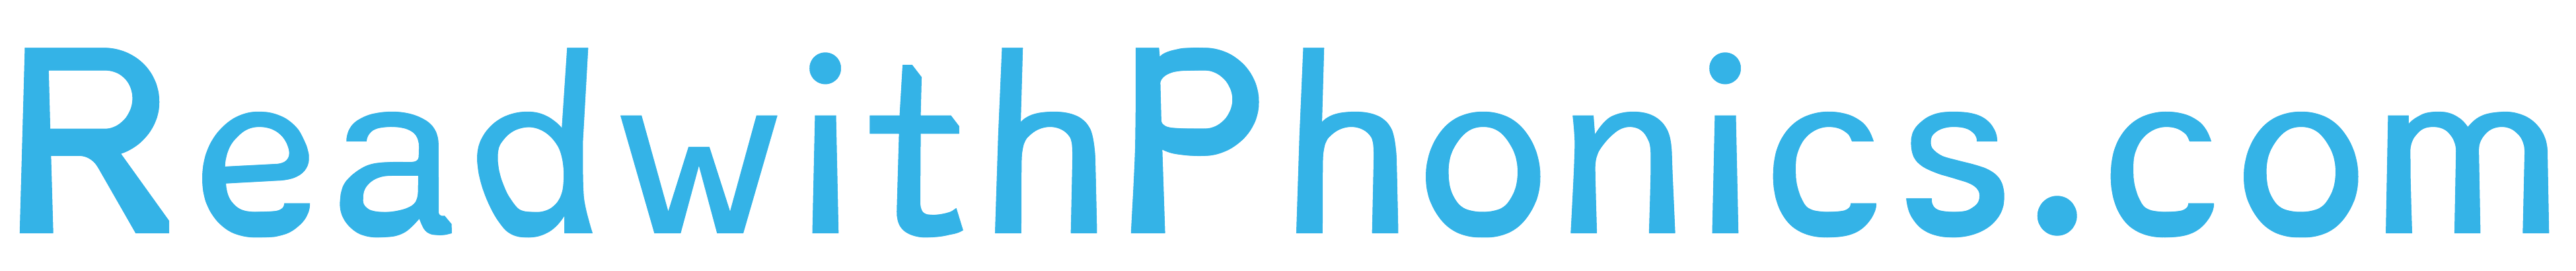 Image result for readwithPhonics.com logo